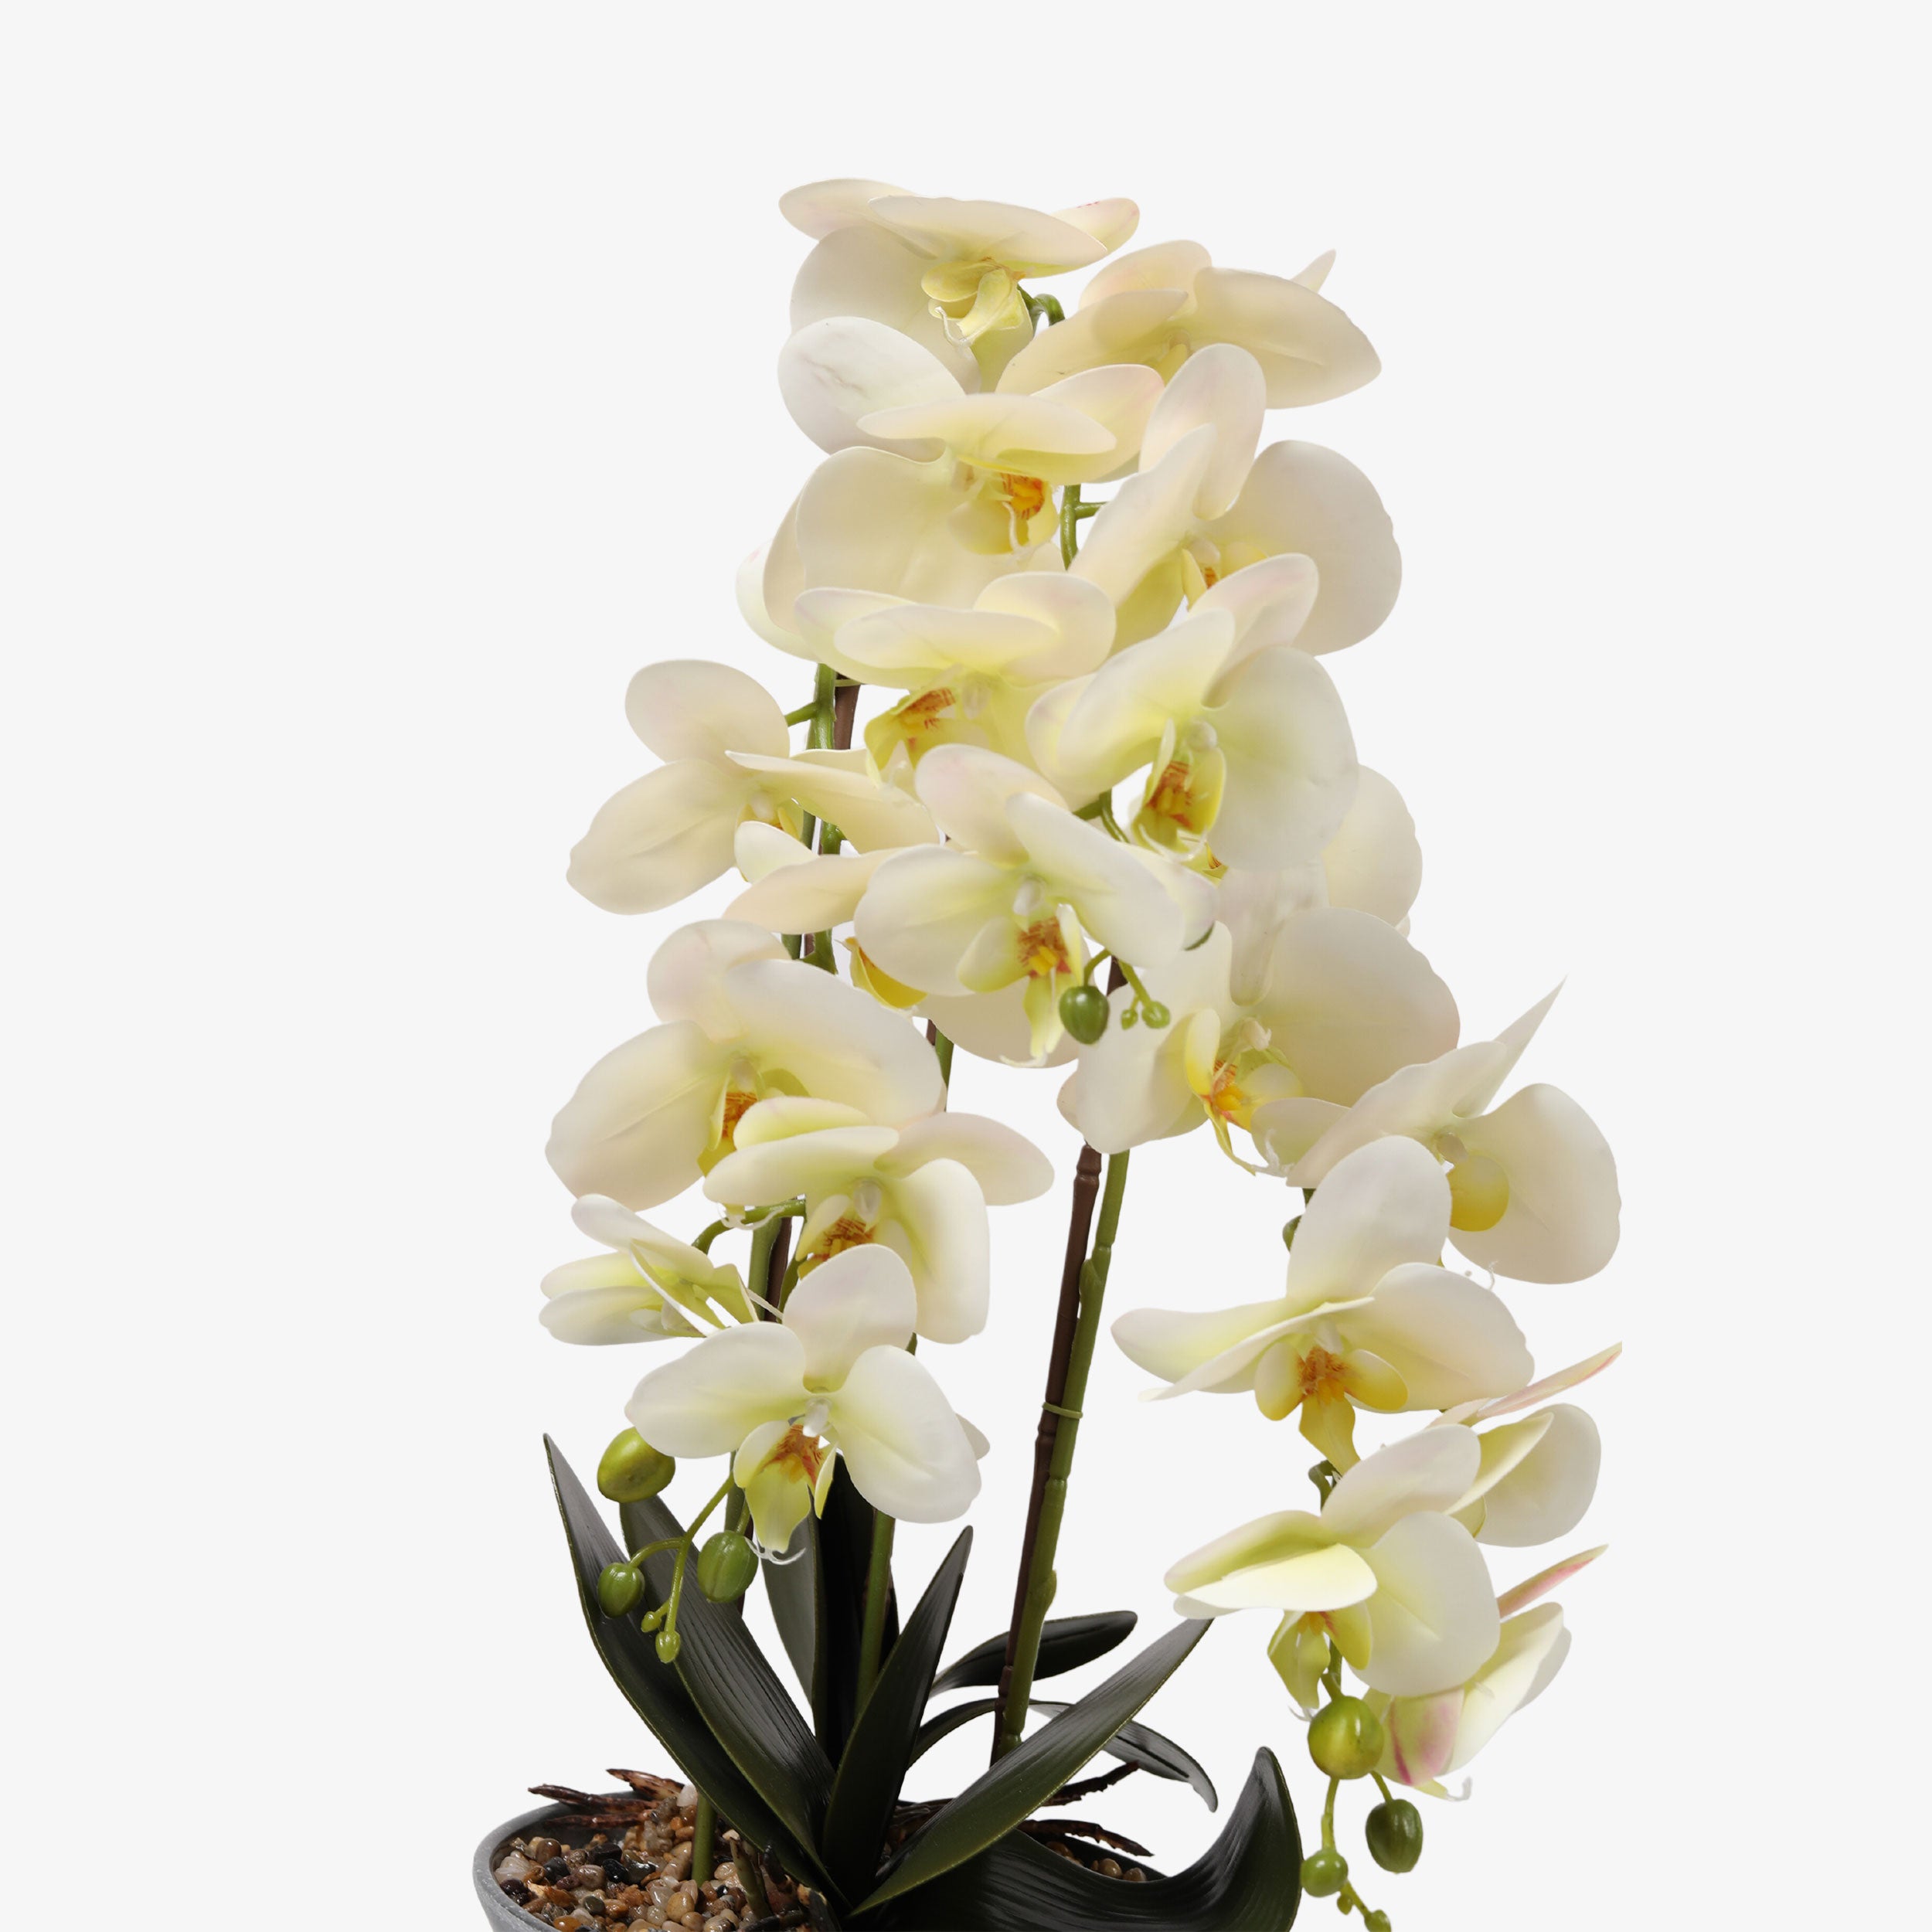 White Orchid Plant With Gray Pot